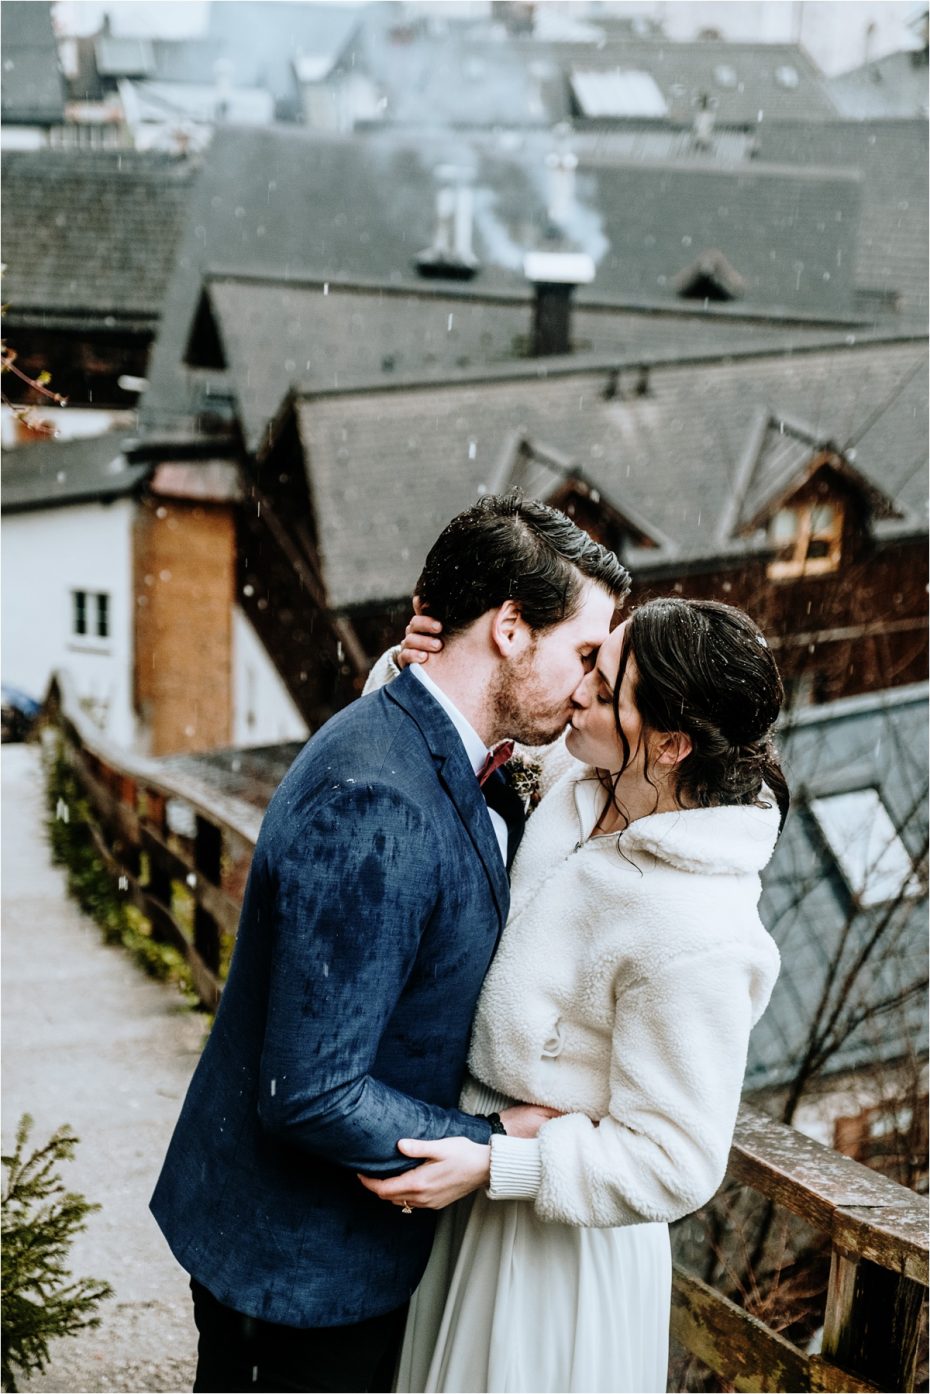 Bride and groom recreate a scene from the notebook, kissing in the rain. Photos by Wild Connections Photography